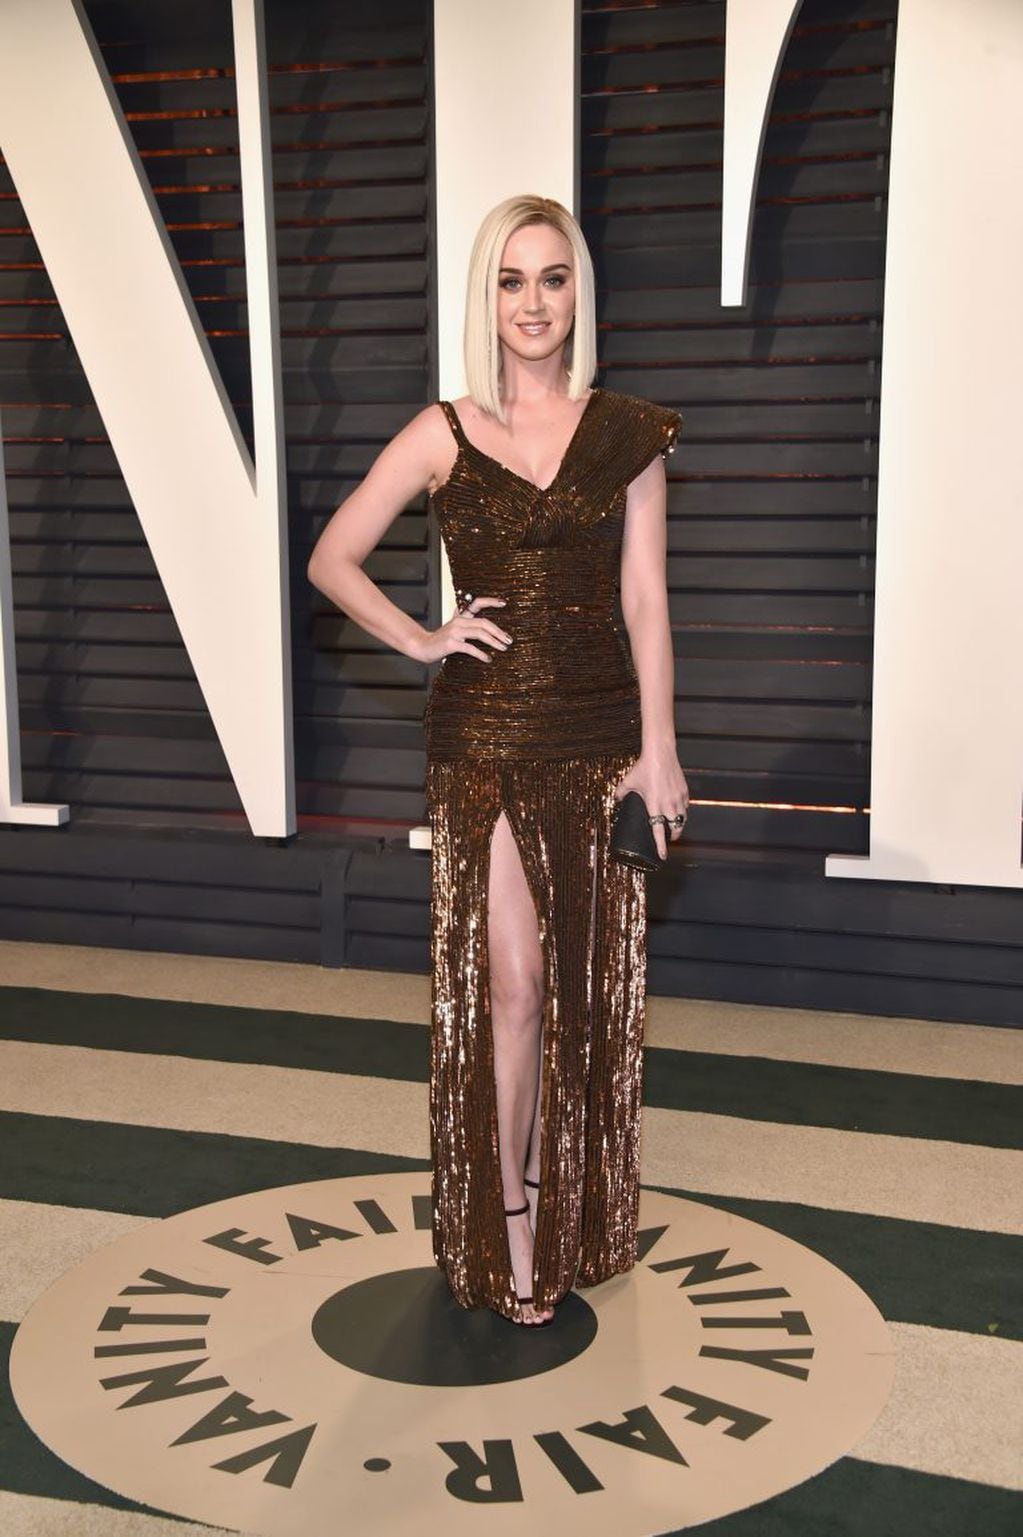 BEVERLY HILLS, CA - FEBRUARY 26: Singer Katy Perry attends the 2017 Vanity Fair Oscar Party hosted by Graydon Carter at Wallis Annenberg Center for the Performing Arts on February 26, 2017 in Beverly Hills, California.   Pascal Le Segretain/Getty Images/A